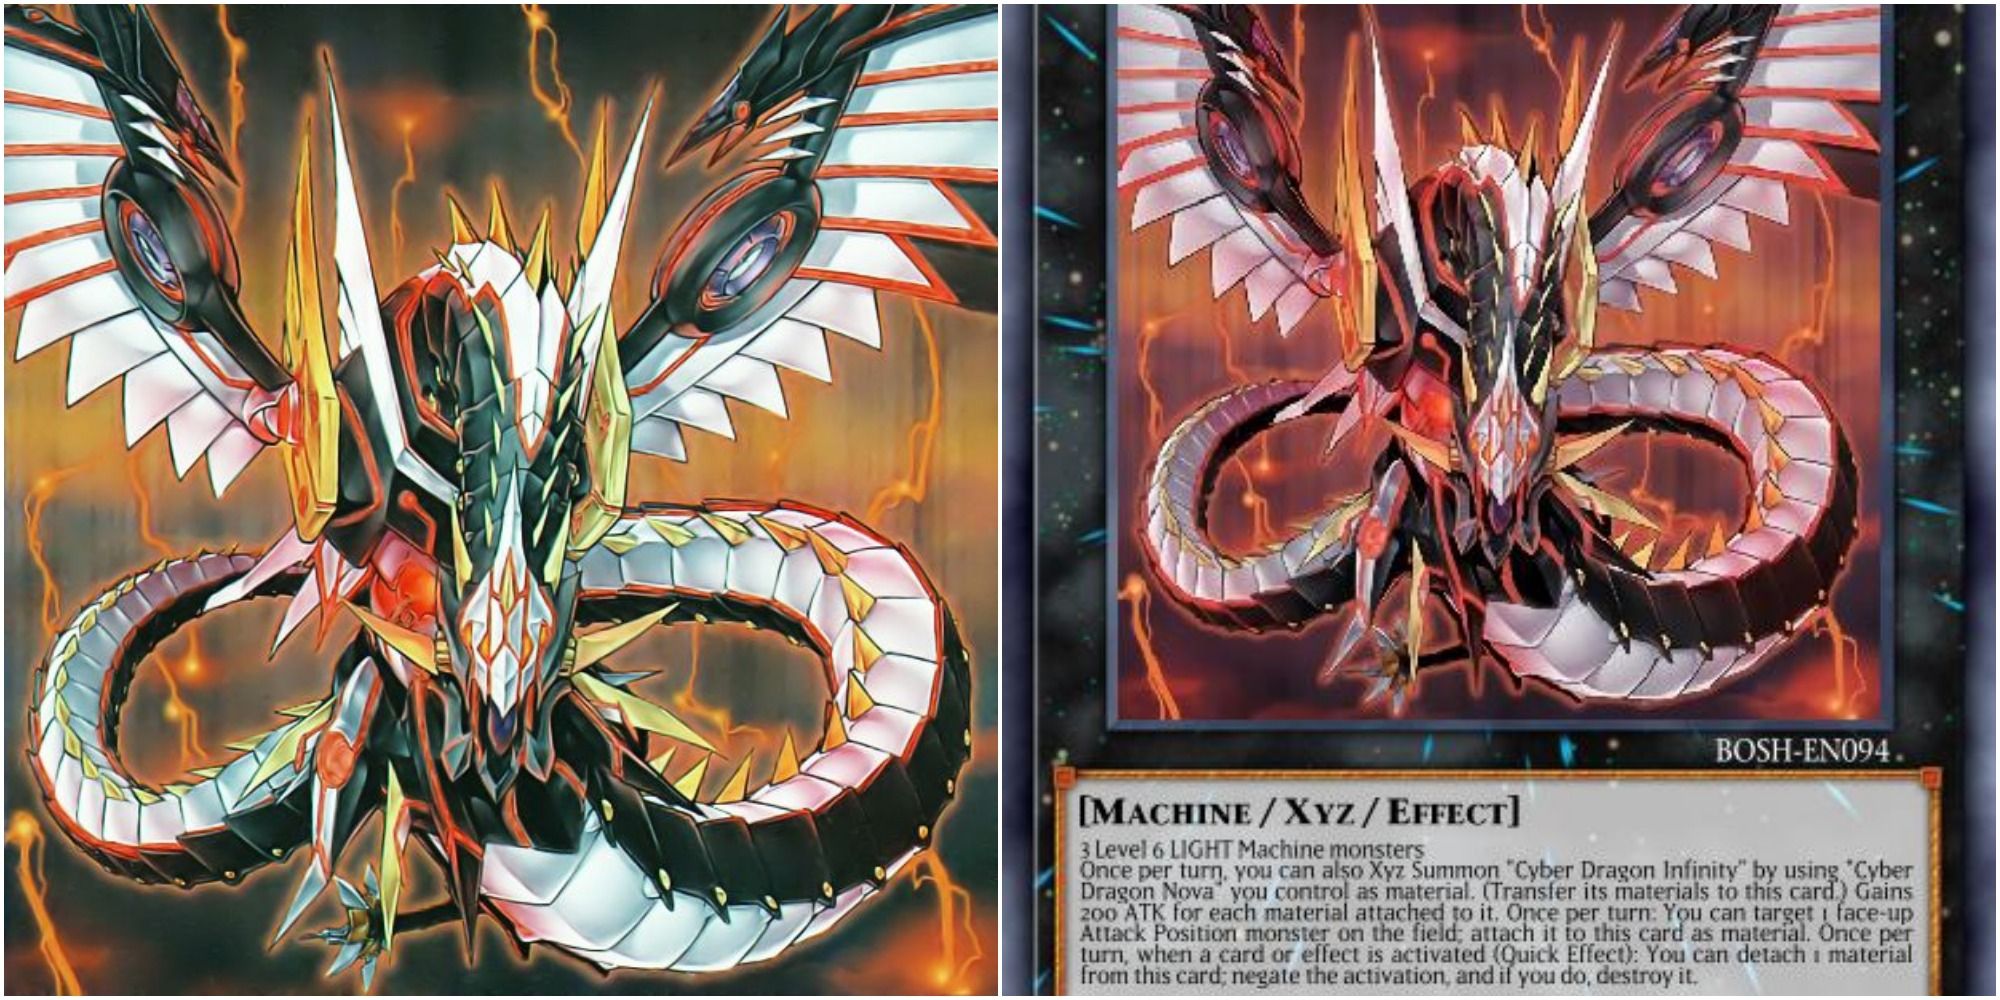 yugioh cyber dragon infinity card art and text